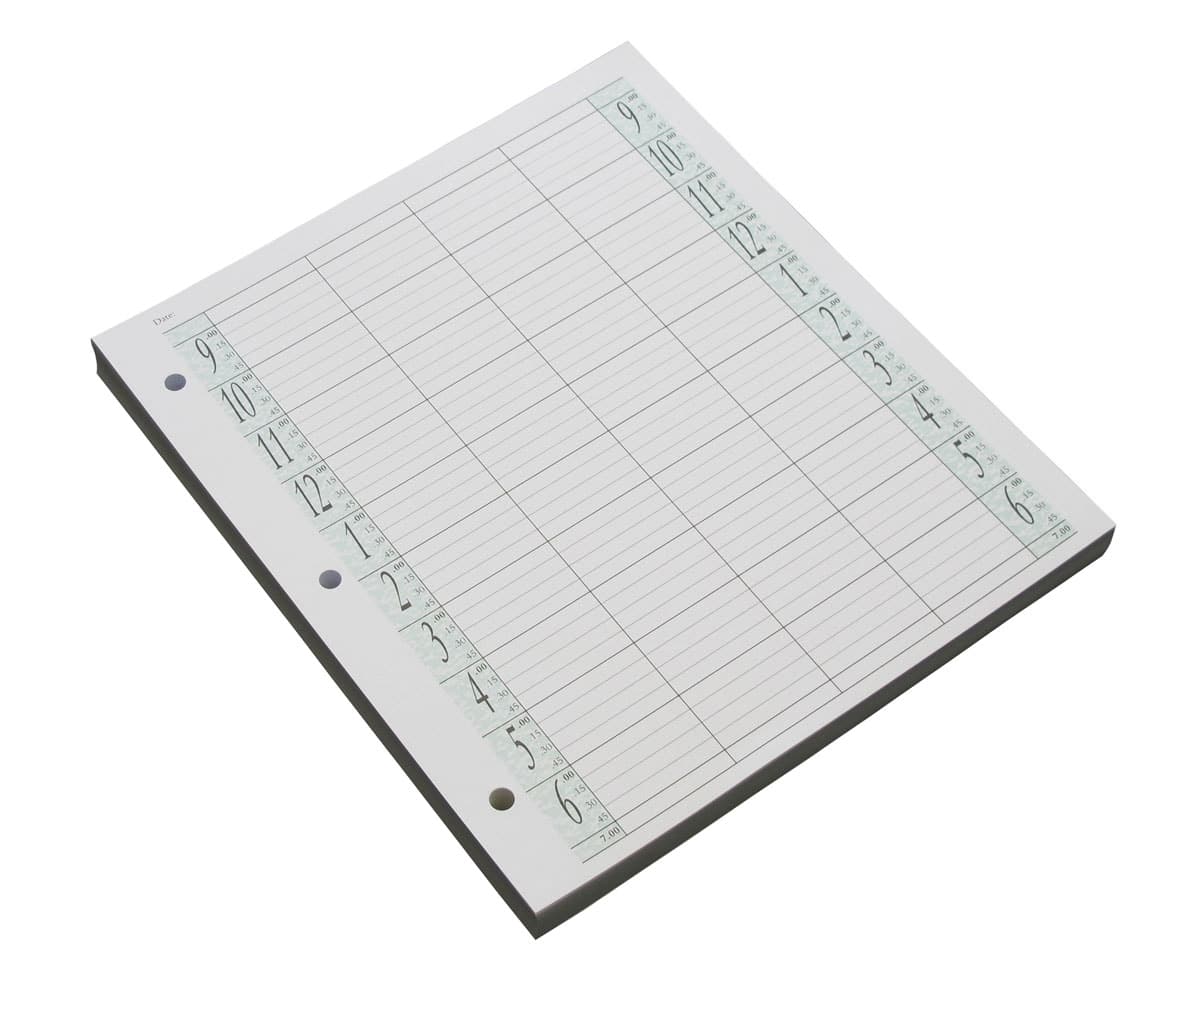 Agenda Loose Leaf Appointment Refill Pages 4 Assitant 3 Hole (100)